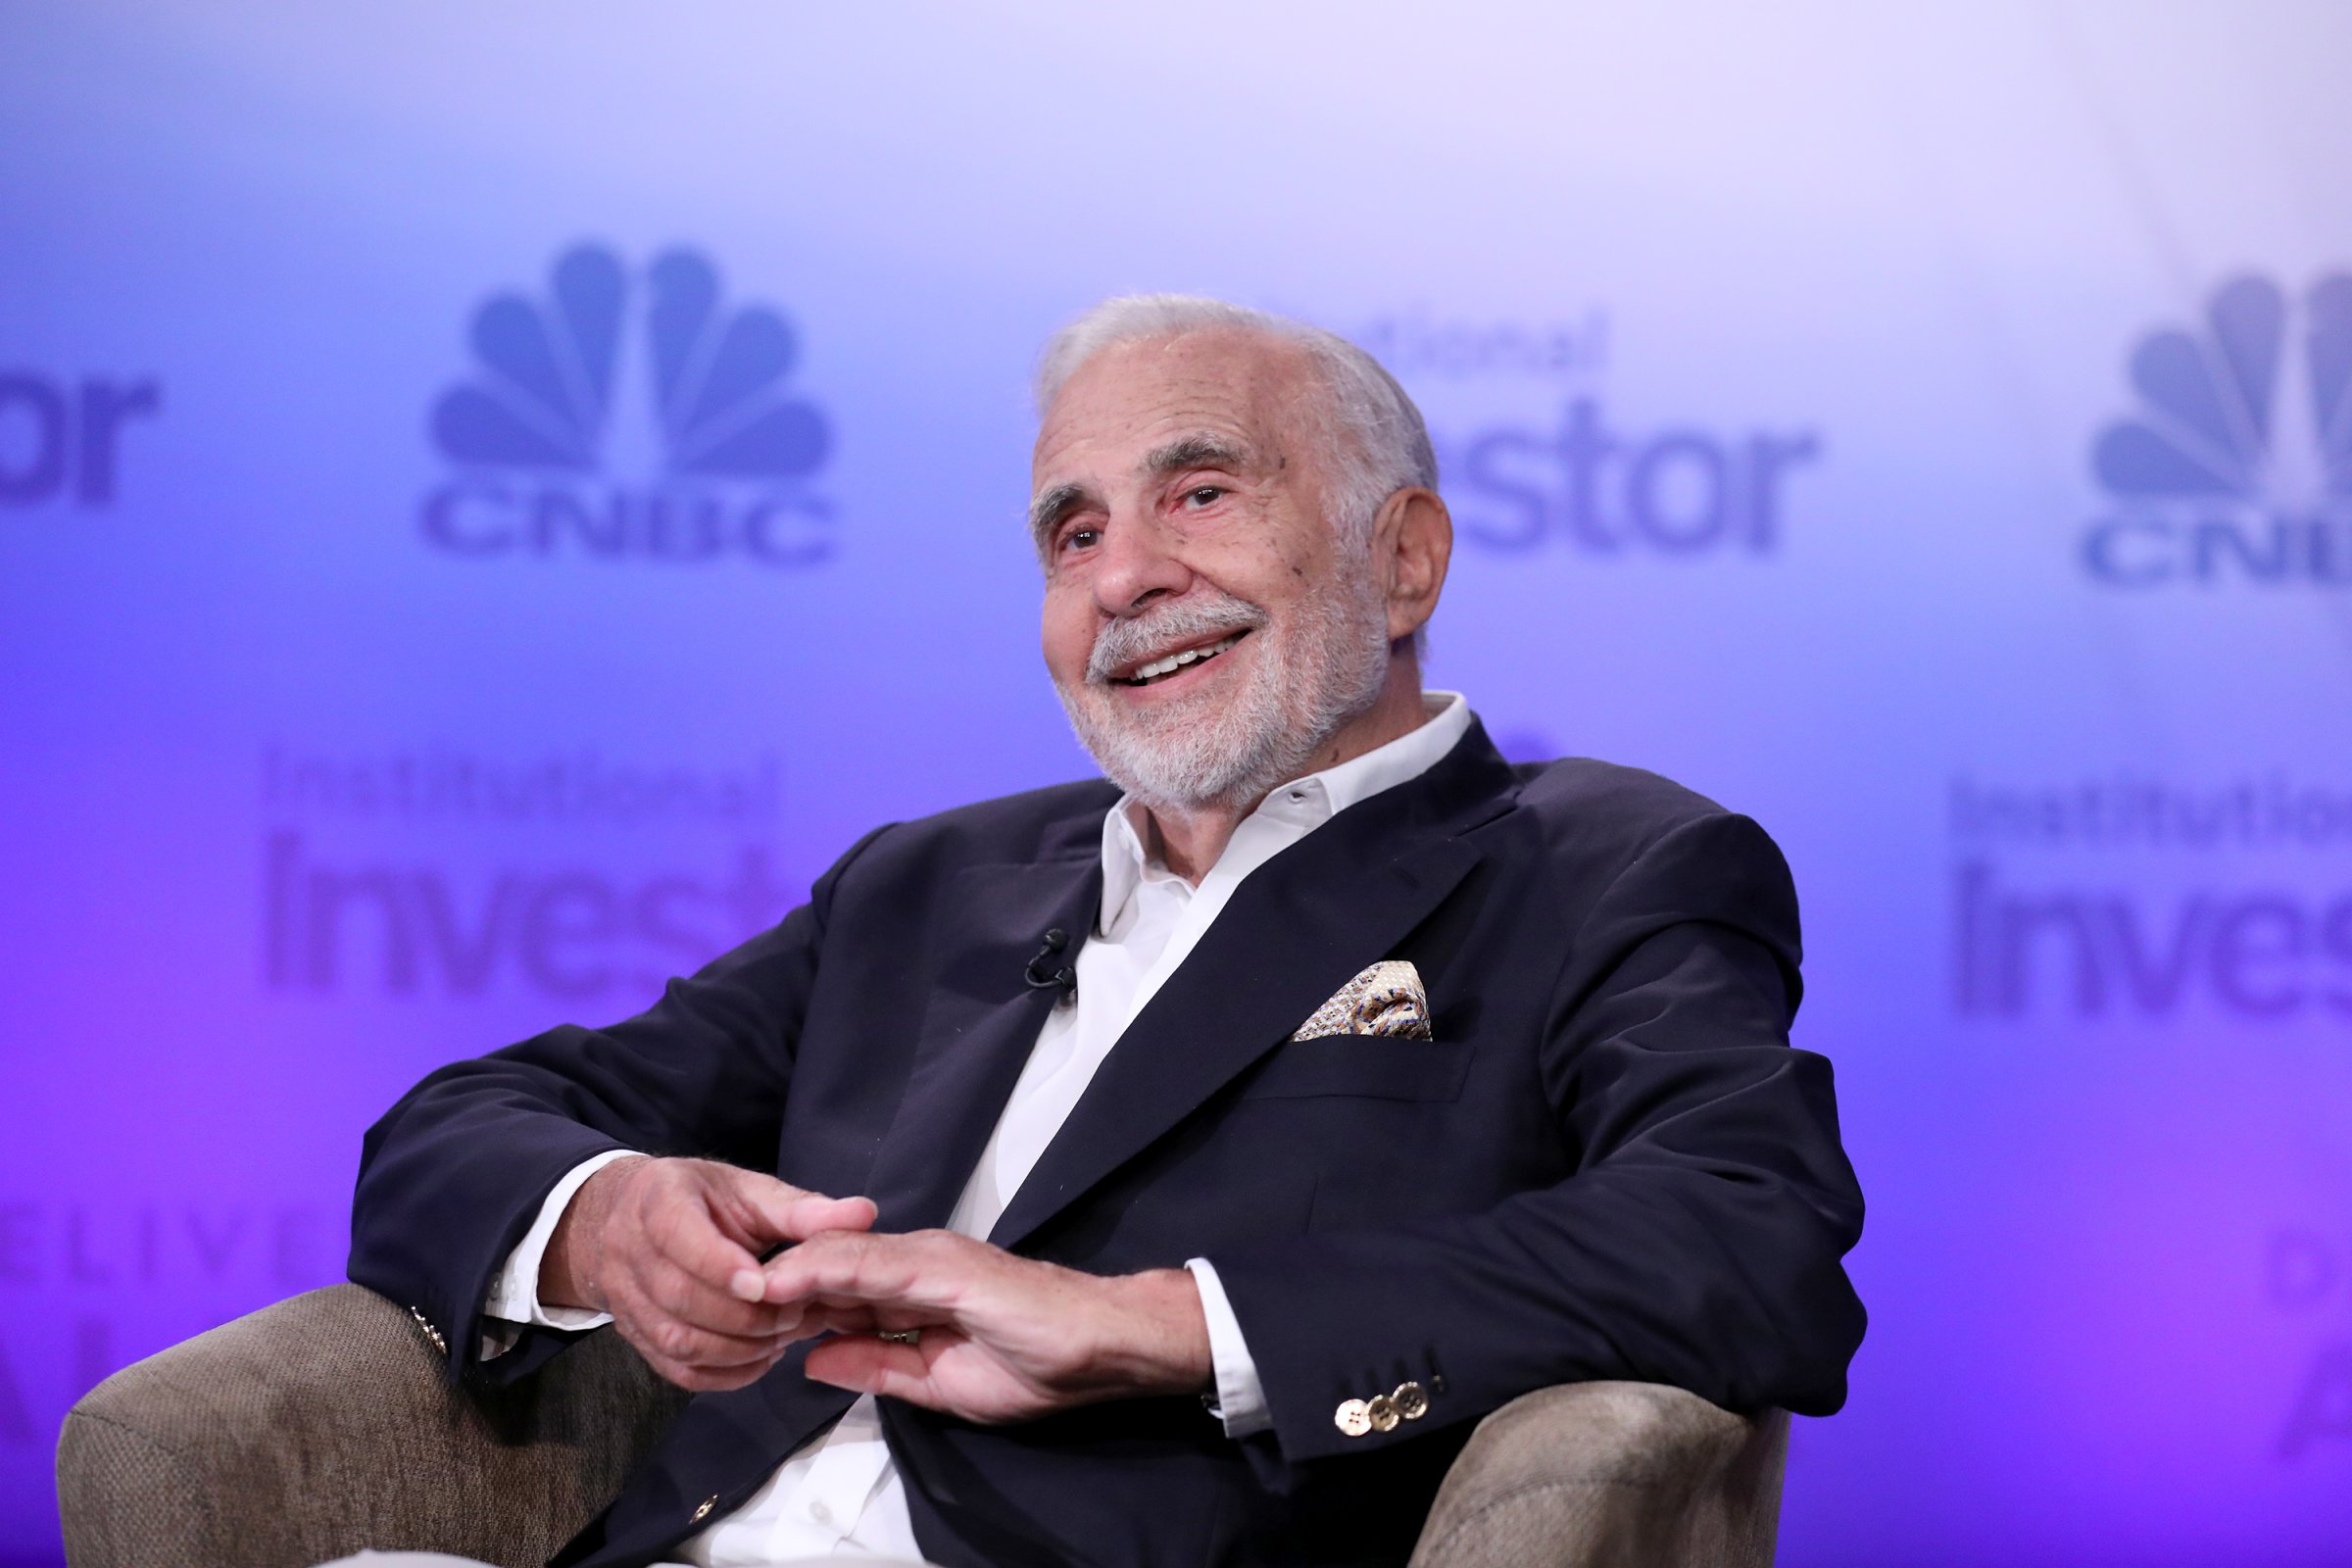 Carl Icahn, Icahn Enterprises Chairman during his keynote at the 6th annual CNBC Institutional Investor Delivering Alpha Conference on Tuesday, September 13, 2016 at the Pierre Hotel in New York.